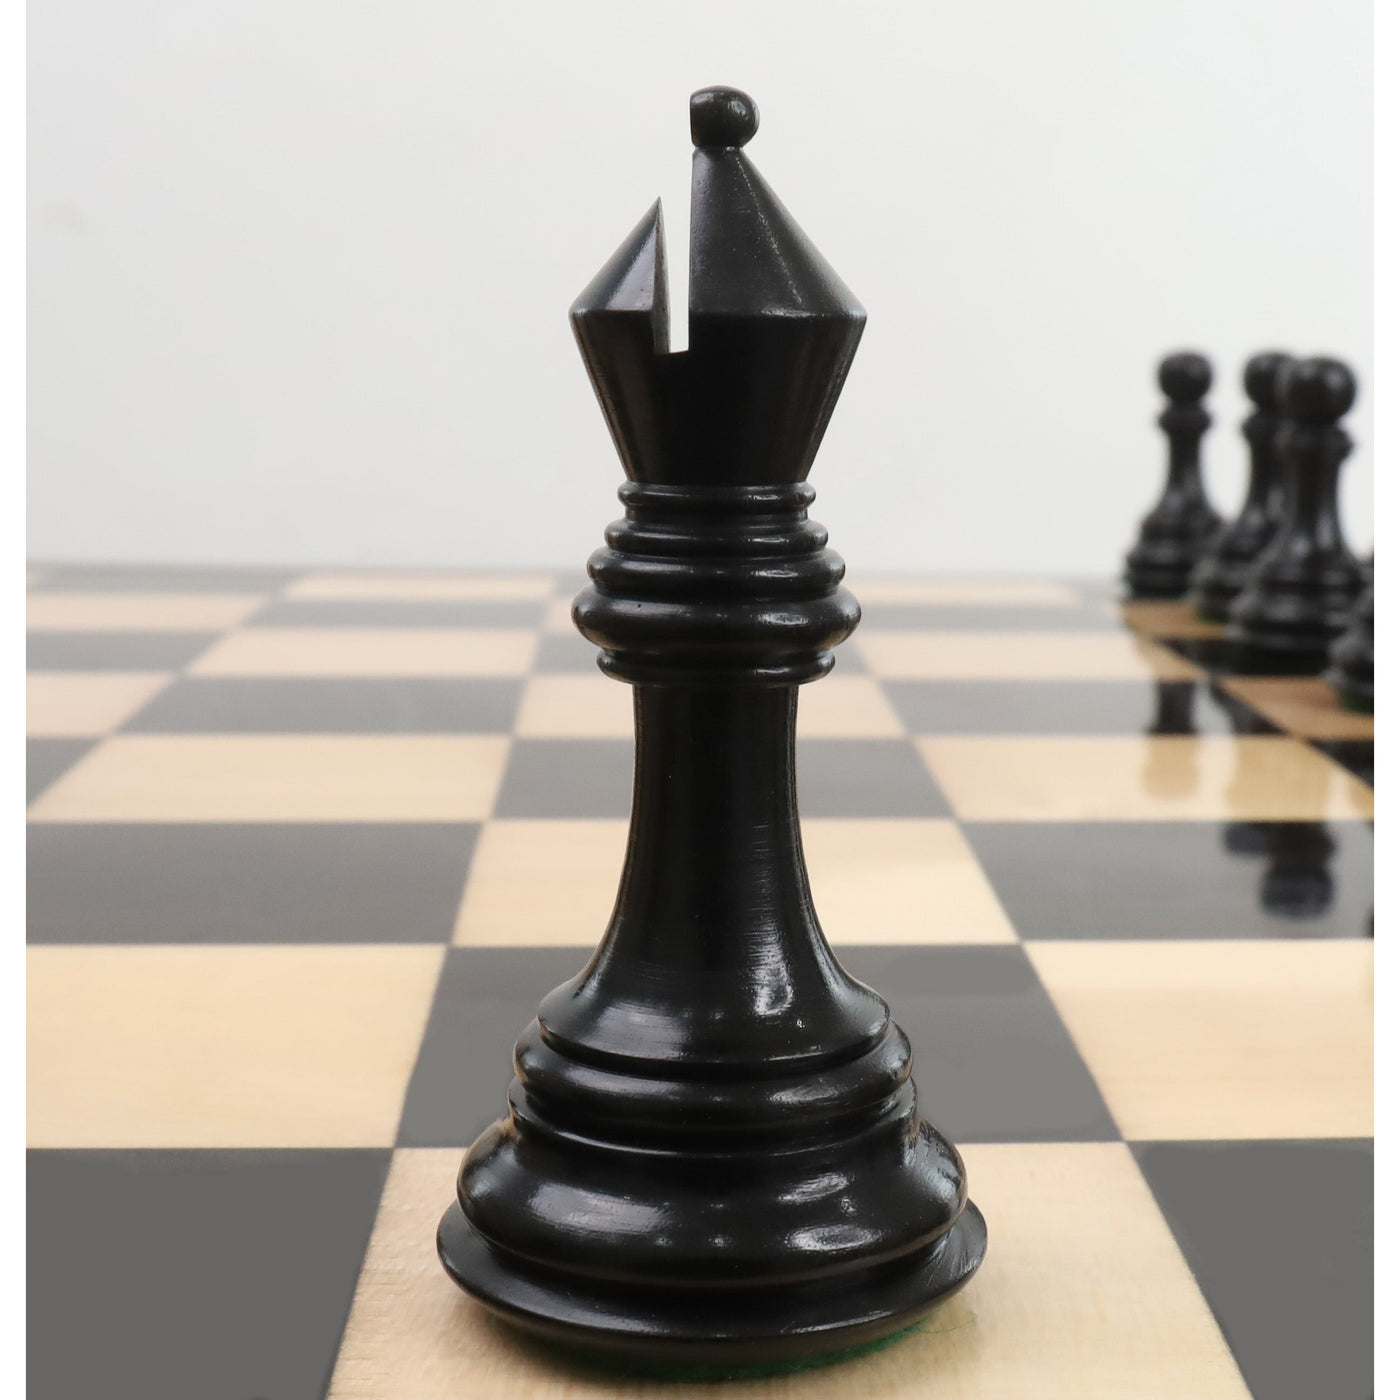 Slightly Imperfect 3.9" New Columbian Staunton Chess Set - Chess Pieces Only - Ebony Wood - Double Weighted